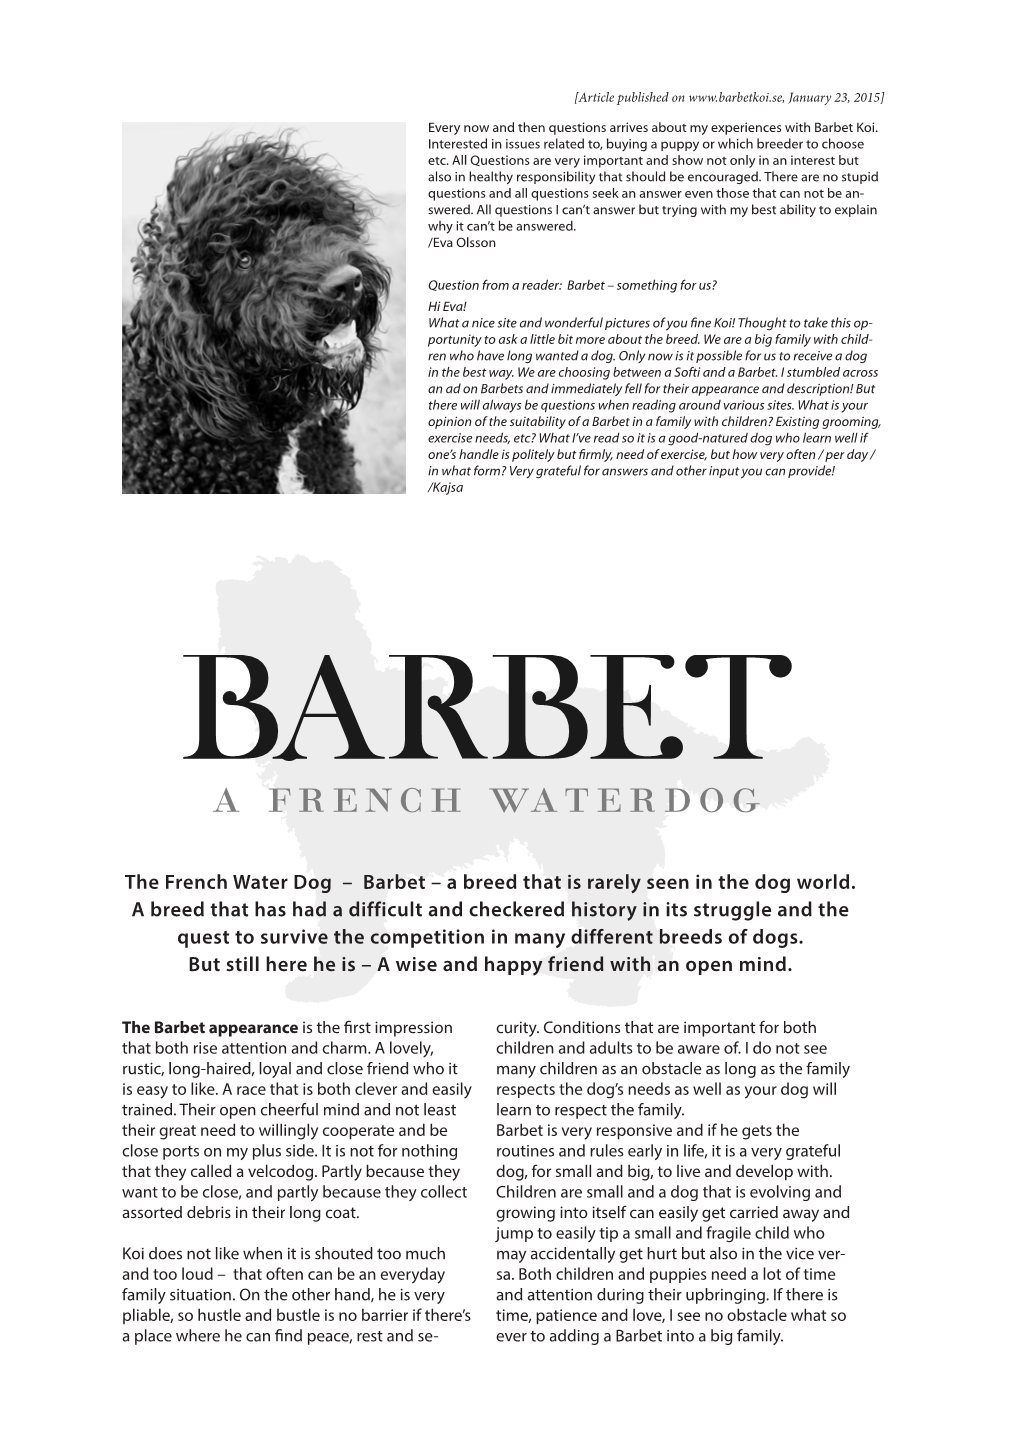 The French Water Dog – Barbet – a Breed That Is Rarely Seen in the Dog World